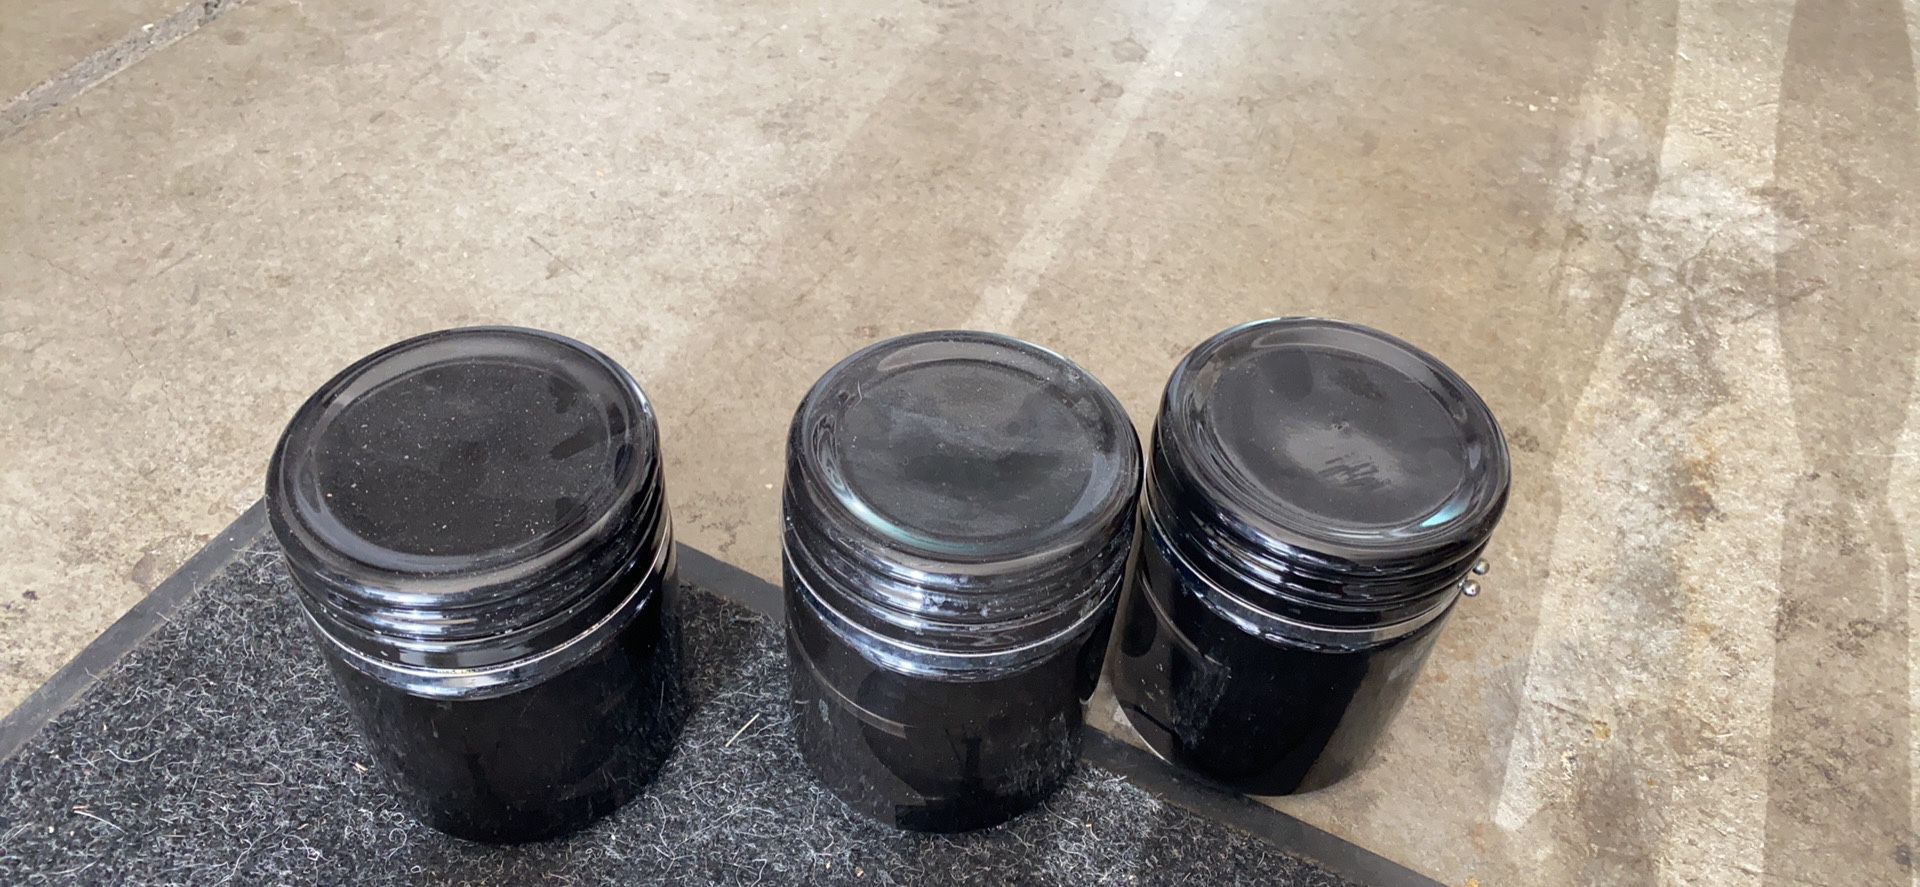 Kitchen canisters/ jars